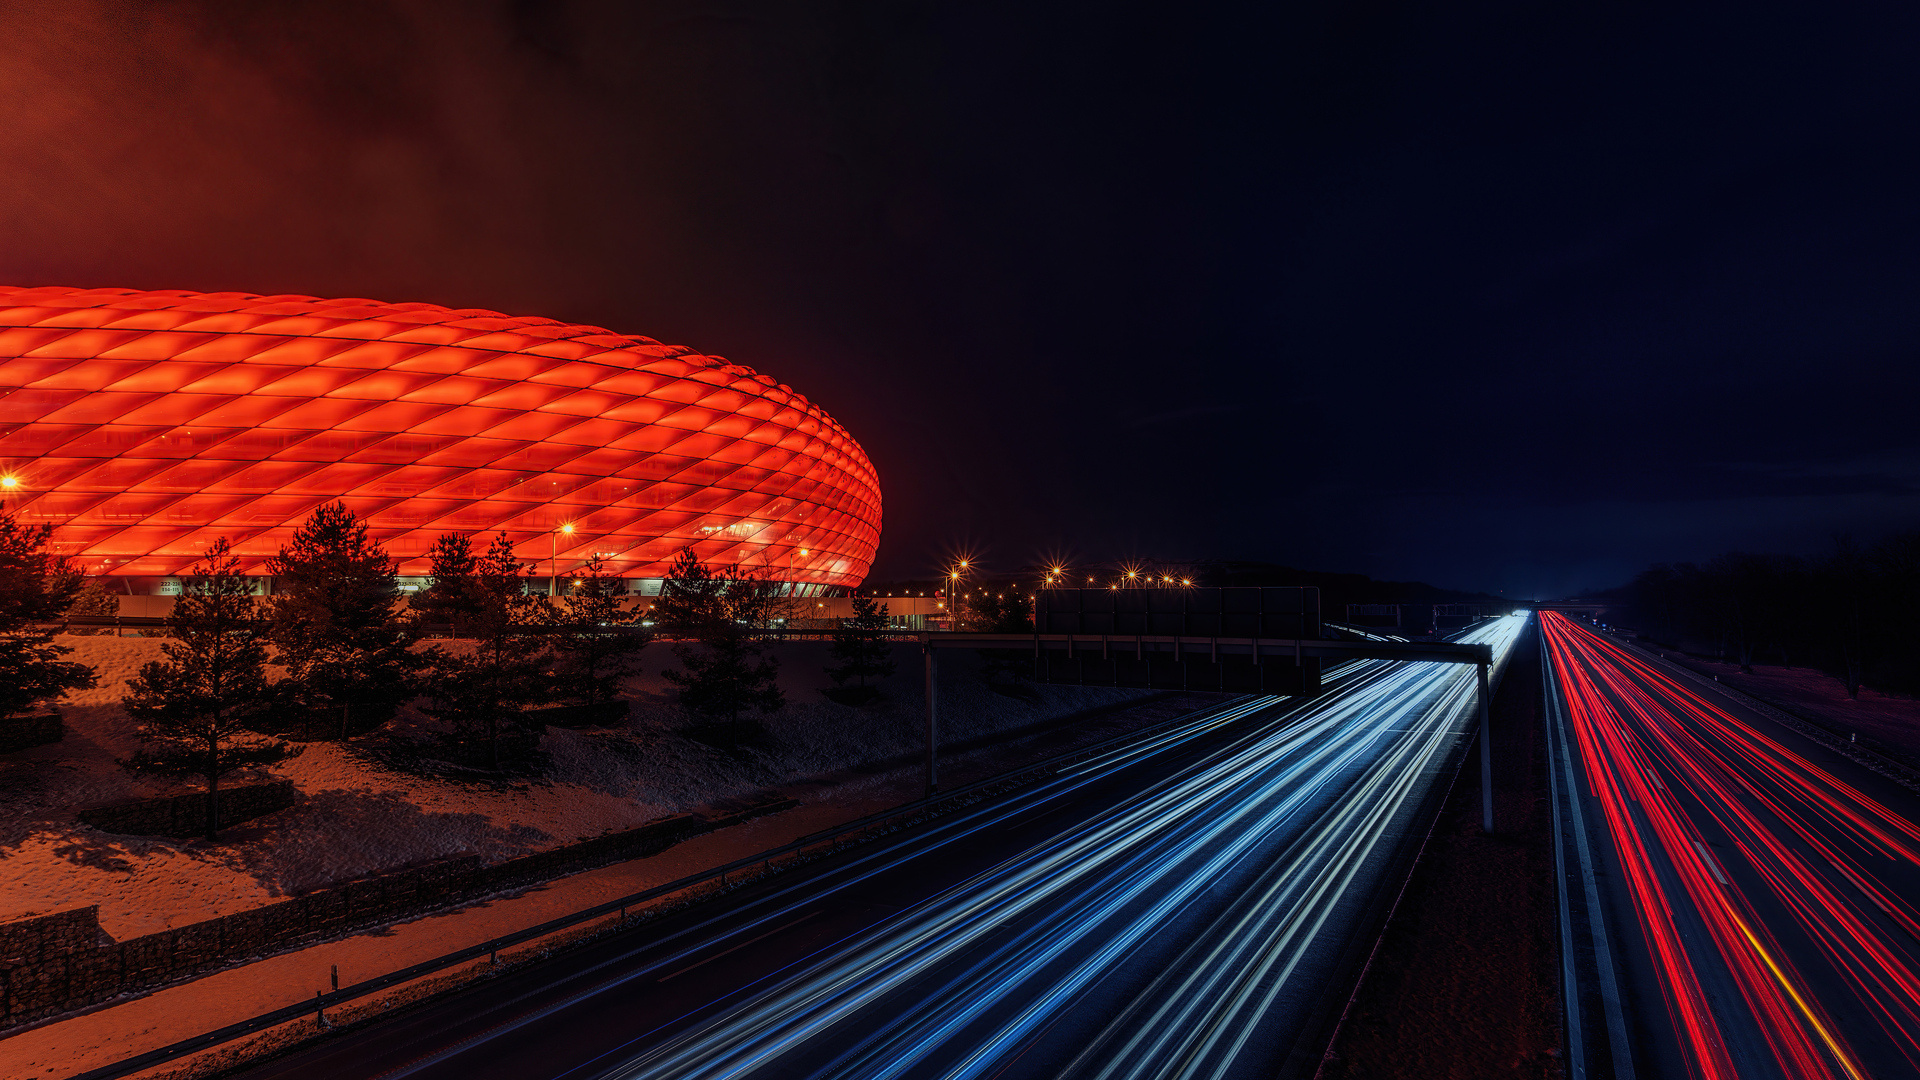 Munich: Allianz Arena, Football stadium, The largest city in southern Germany. 1920x1080 Full HD Wallpaper.